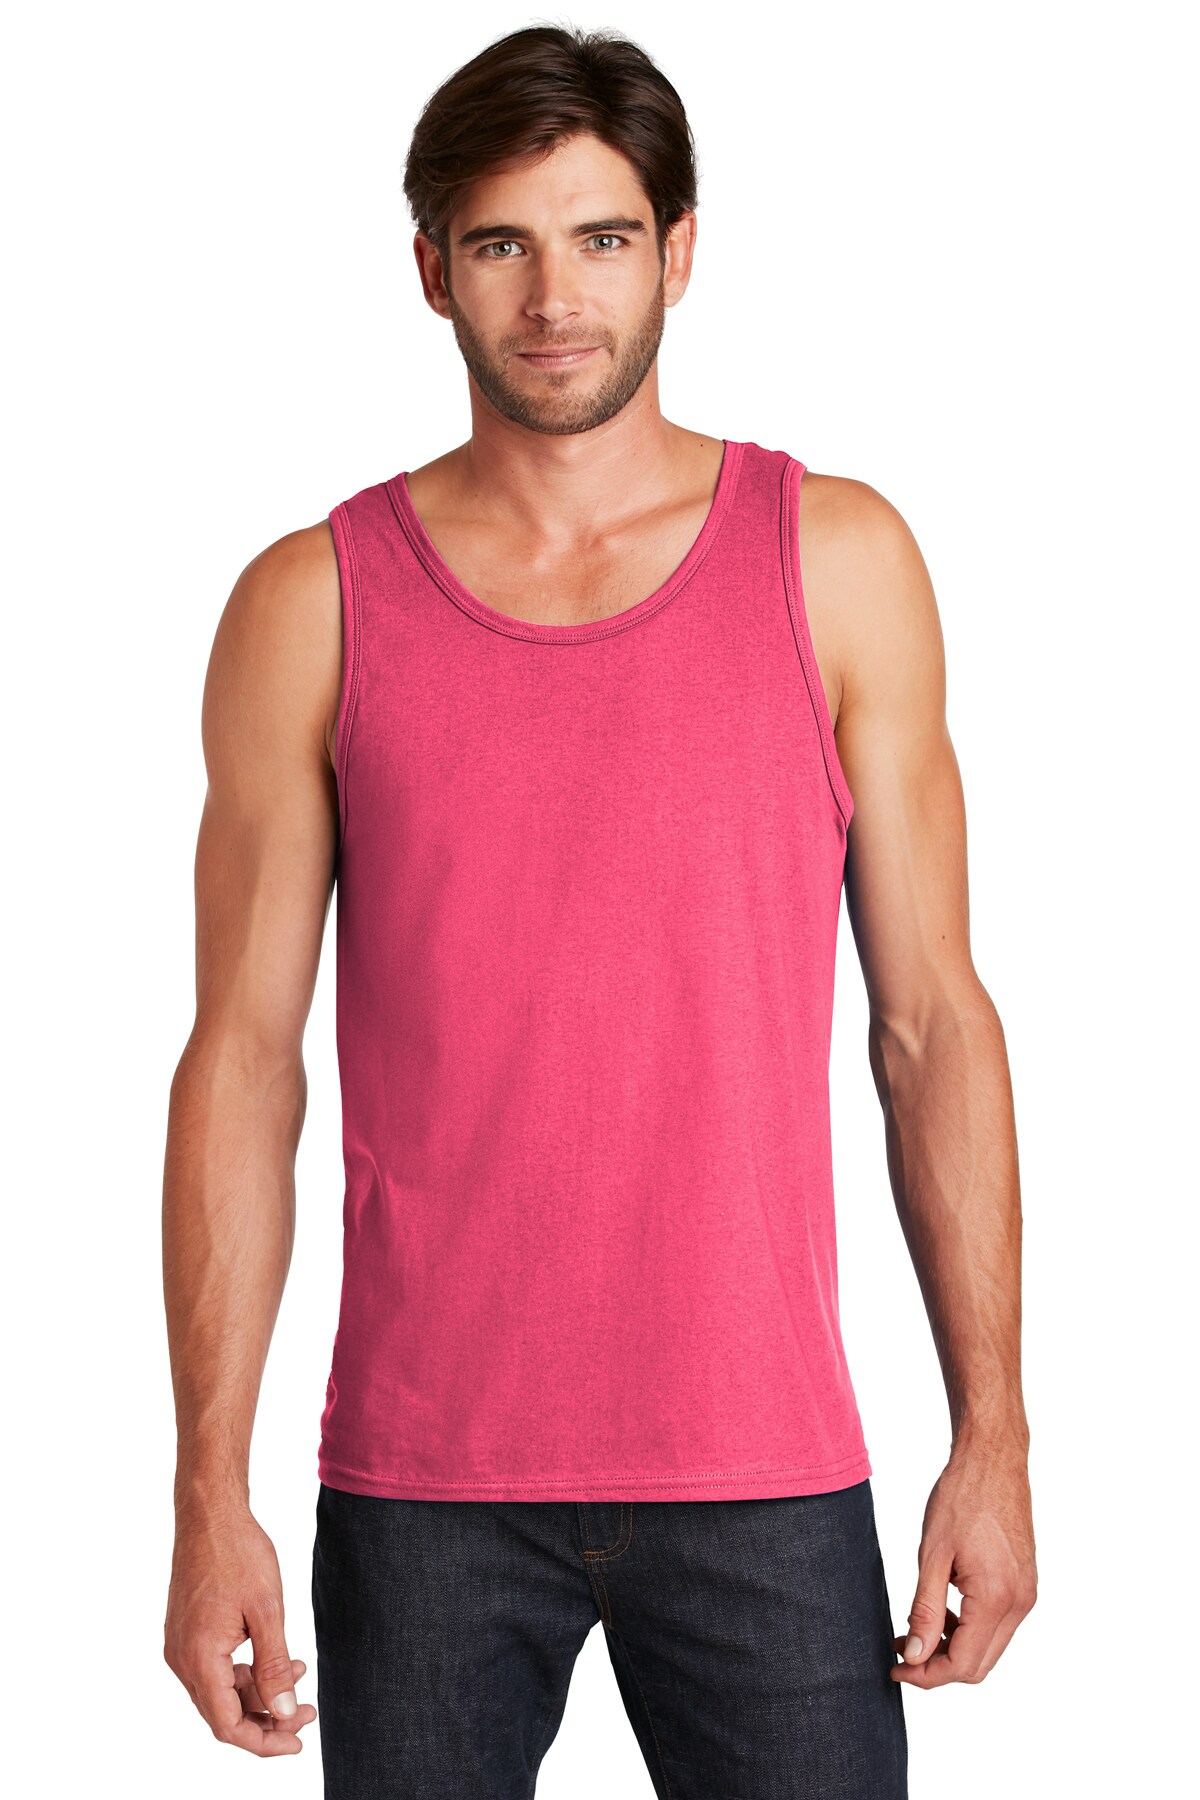 Best Concert Tank, Metal Concert Clothing, Rafted with comfort in mind  from 4.5-ounce, 100% soft spun cotton